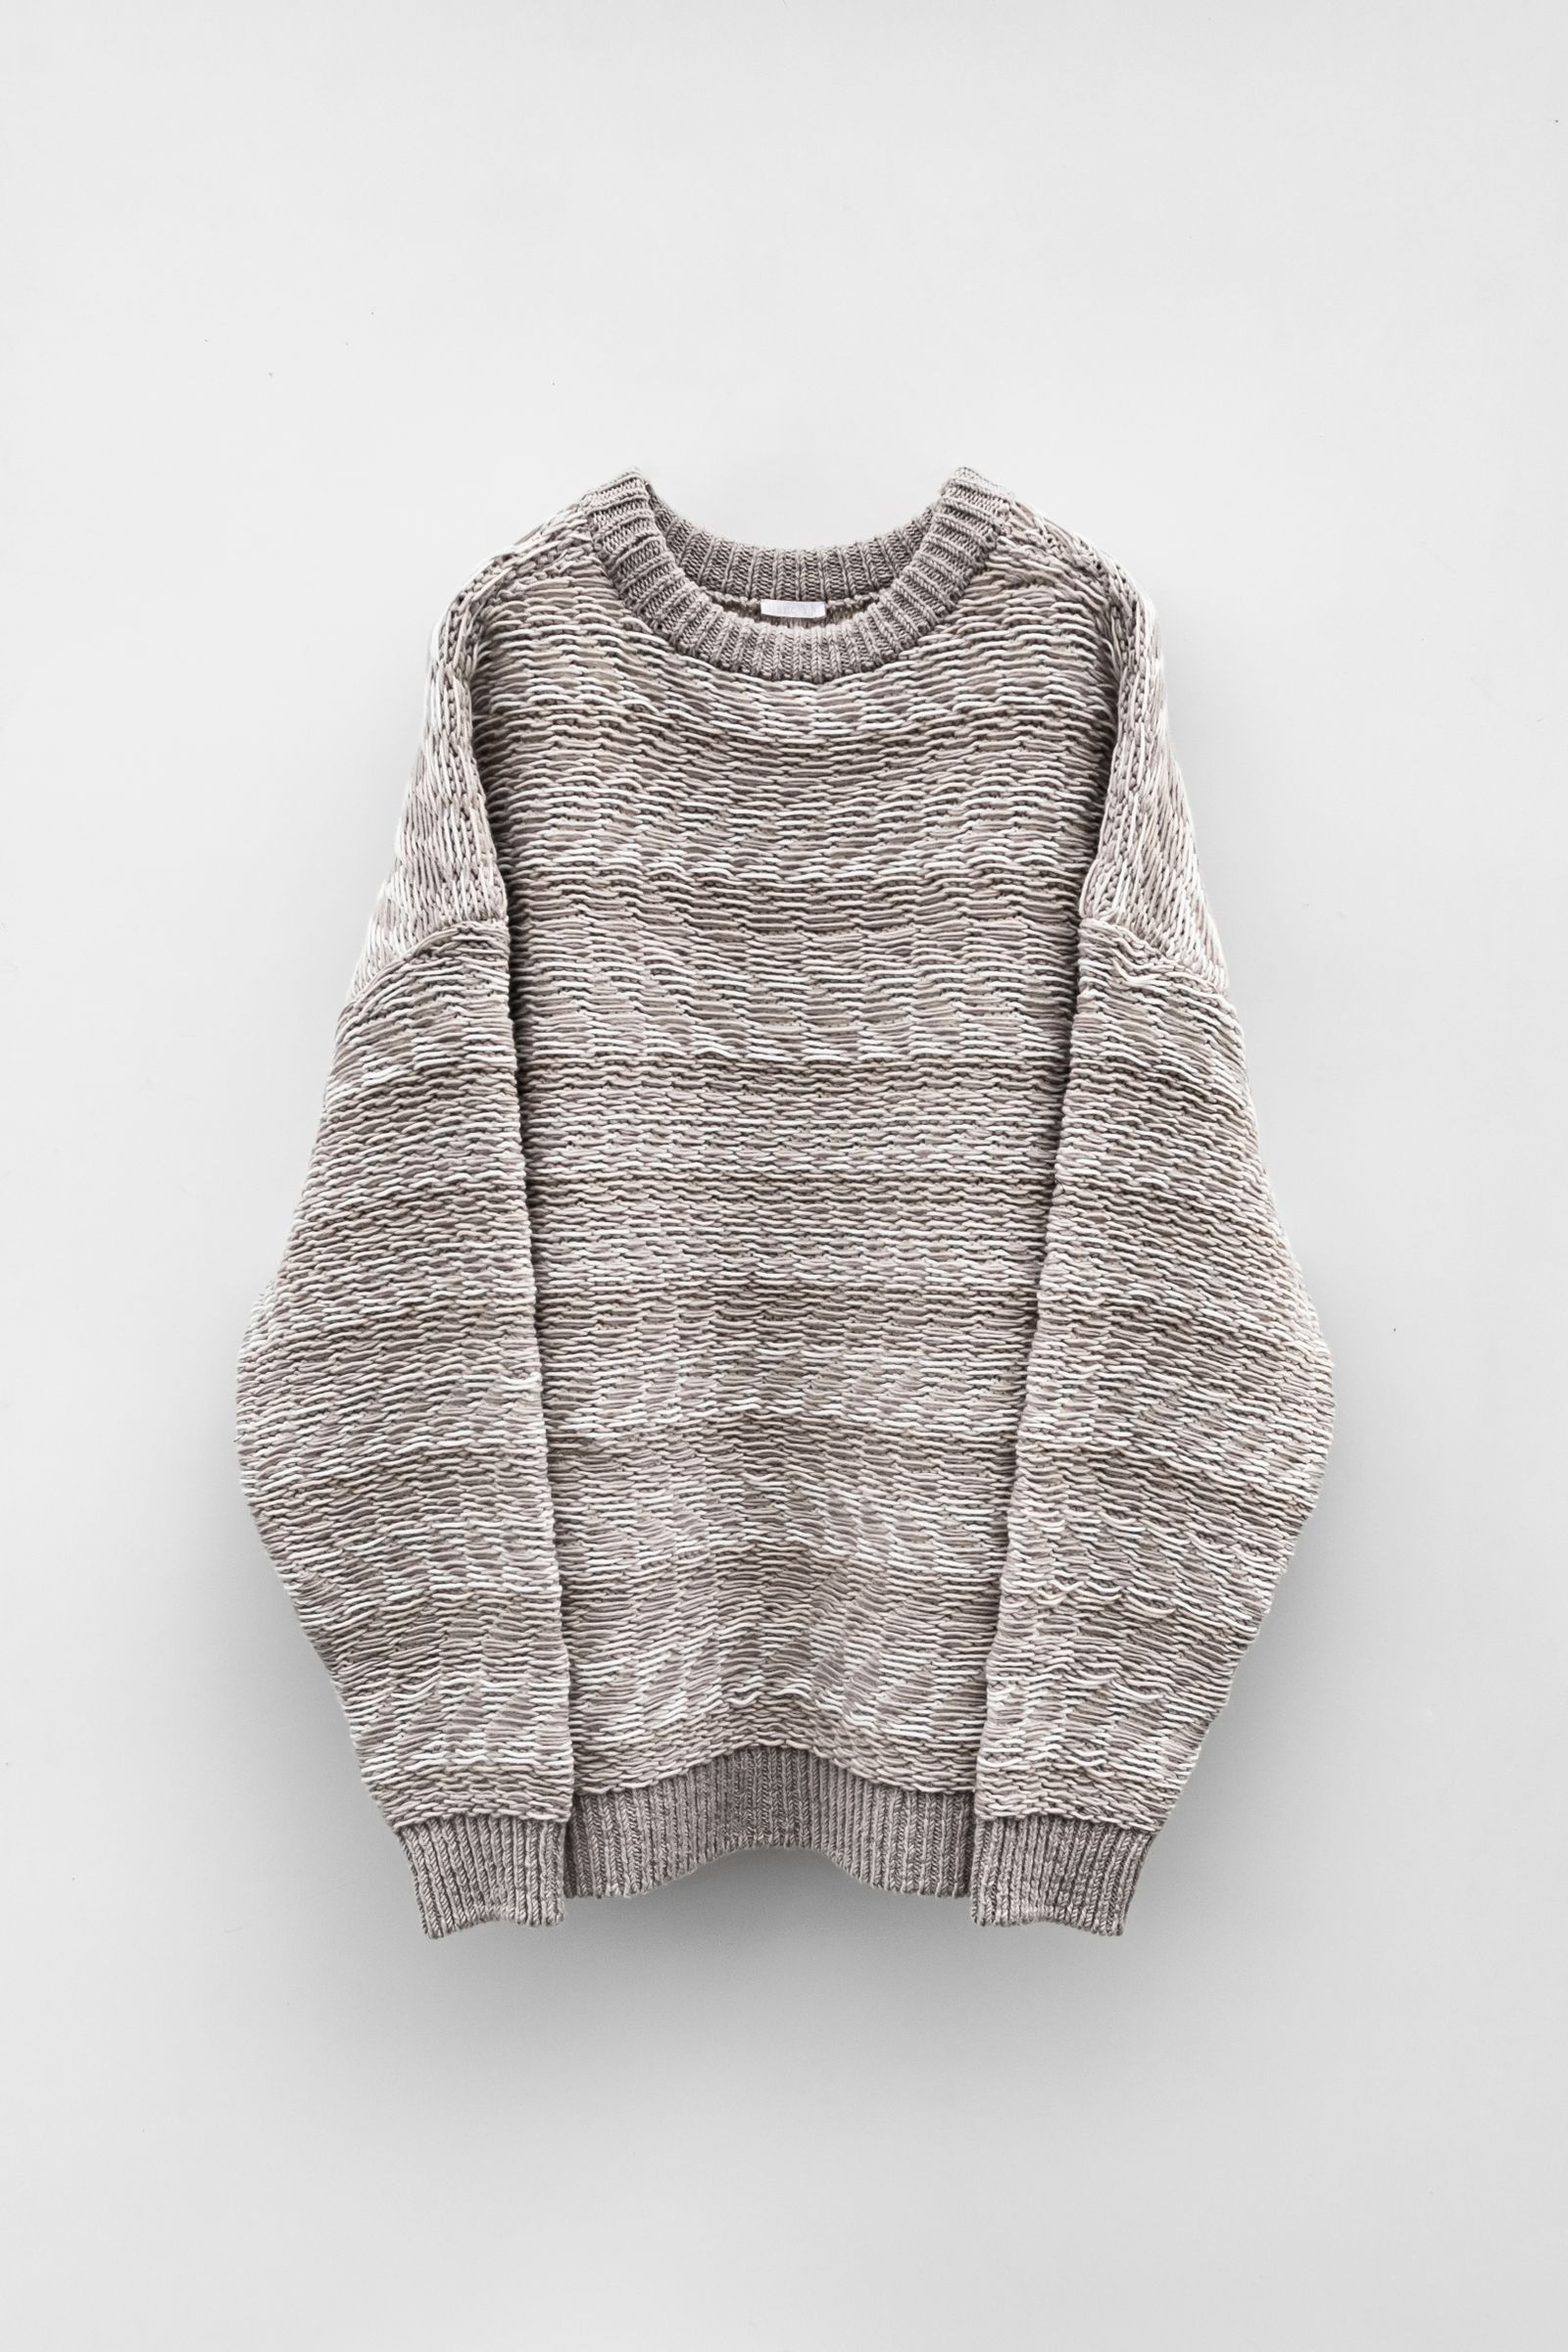 Blanc YM - Inside out Knit Pullover / Beige | Retikle Online Store